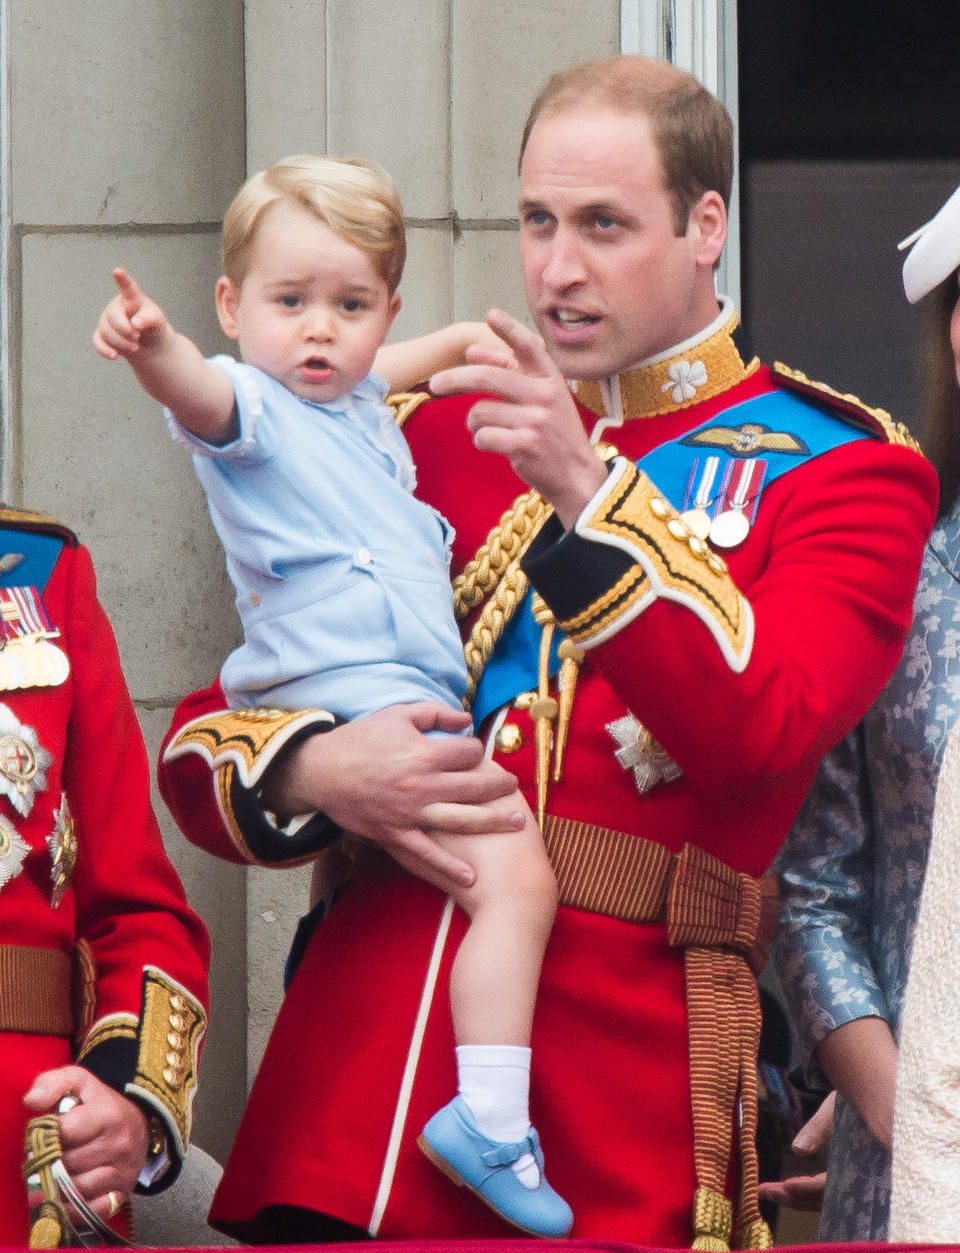 One-year-old Prince George attends his first Trooping the Colour. (PA Images)